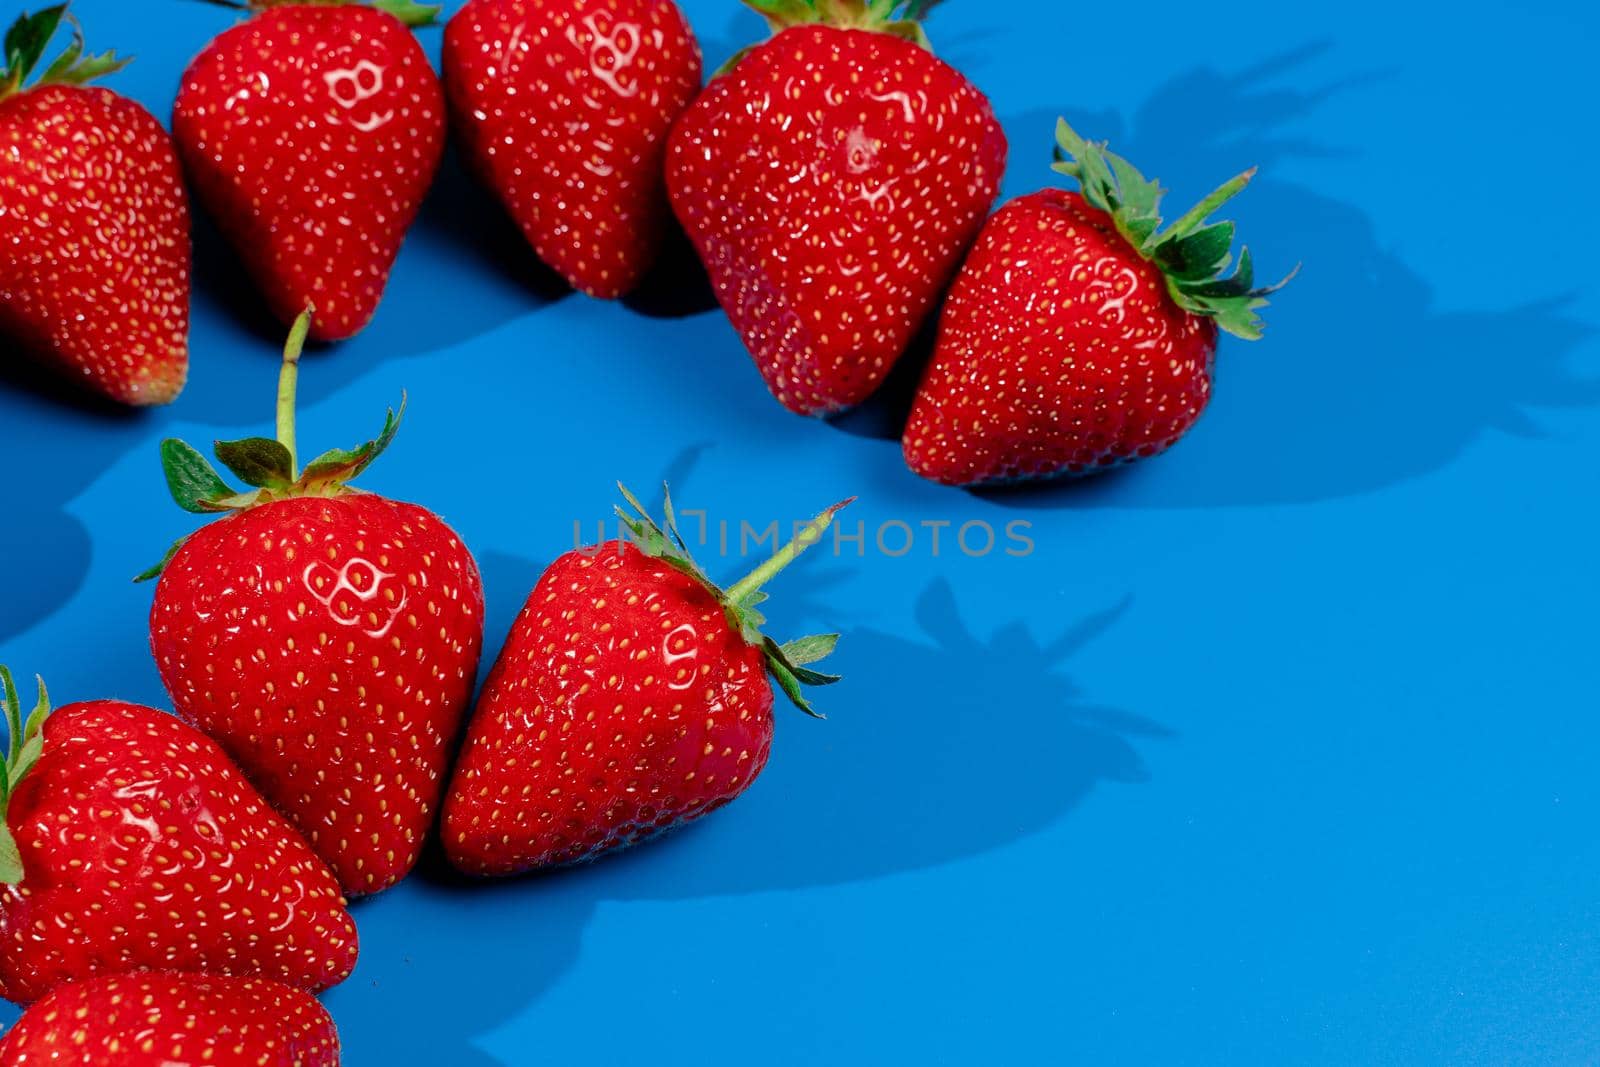 Bunch of strawberries on blue background. Red berry summer seasonal fruit